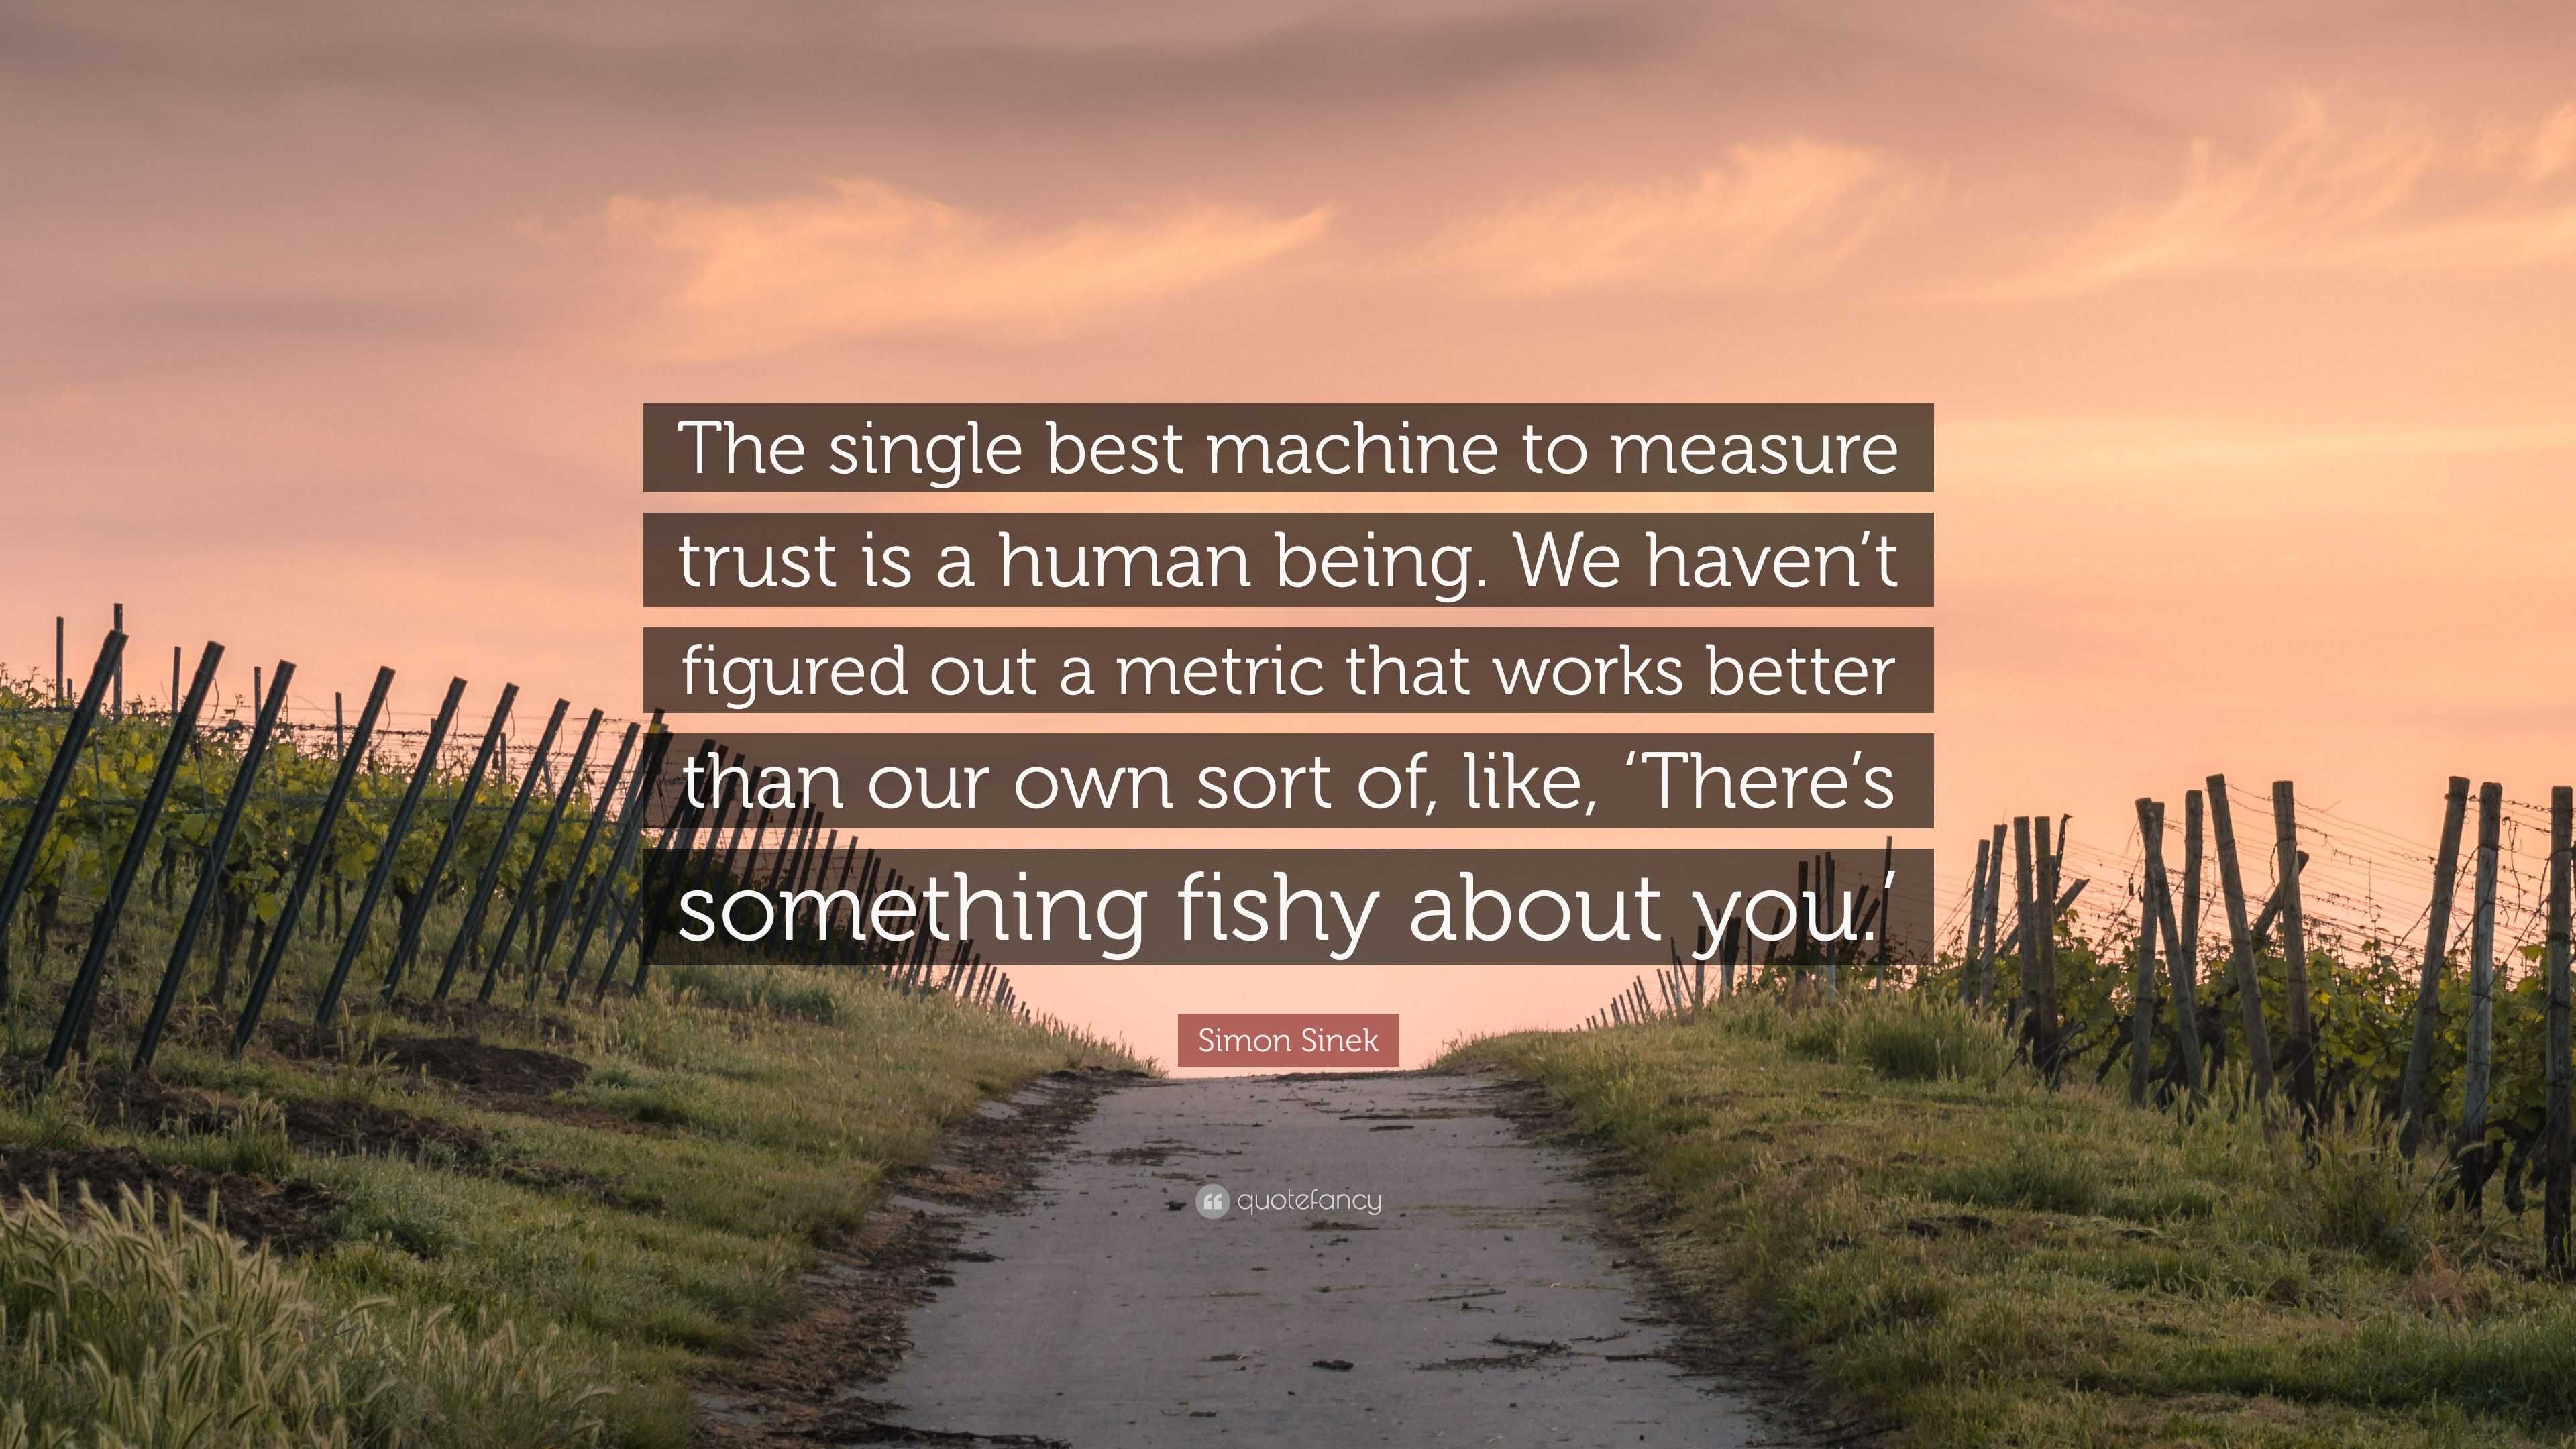 Simon Sinek Quote: “The single best machine to measure trust is a